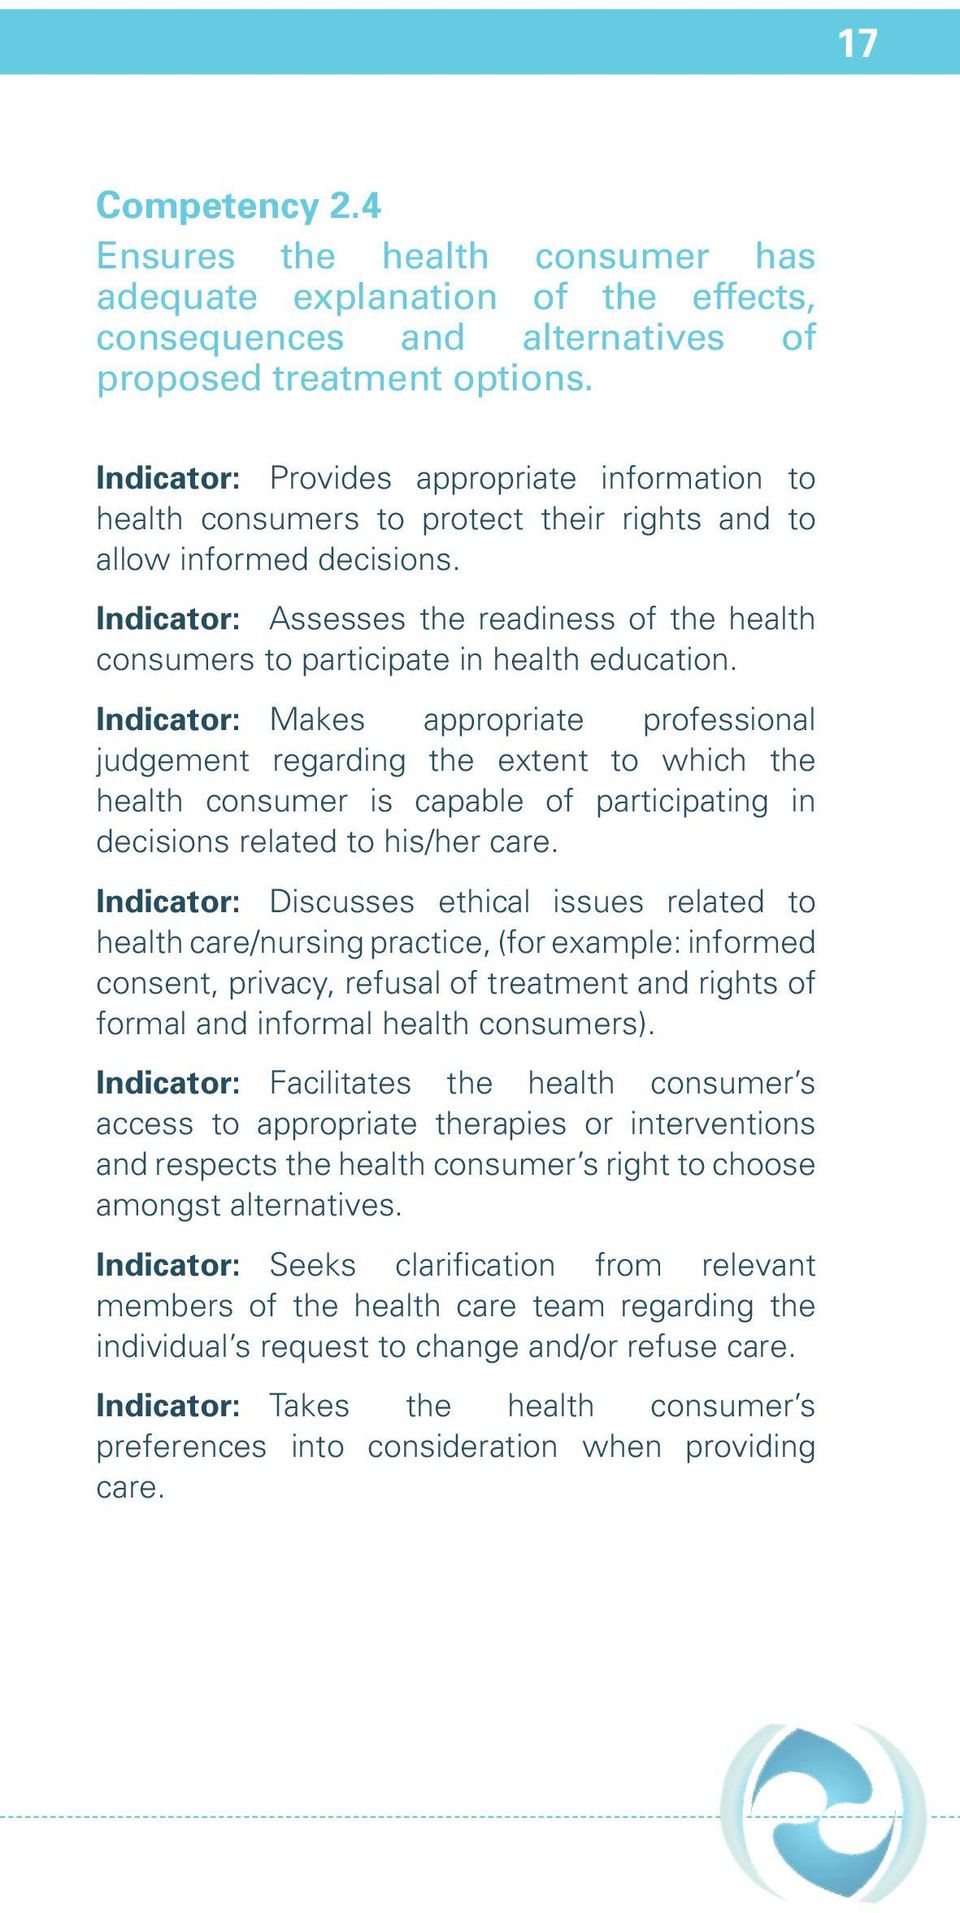 Indicator: Assesses the readiness of the health consumers to participate in health education.